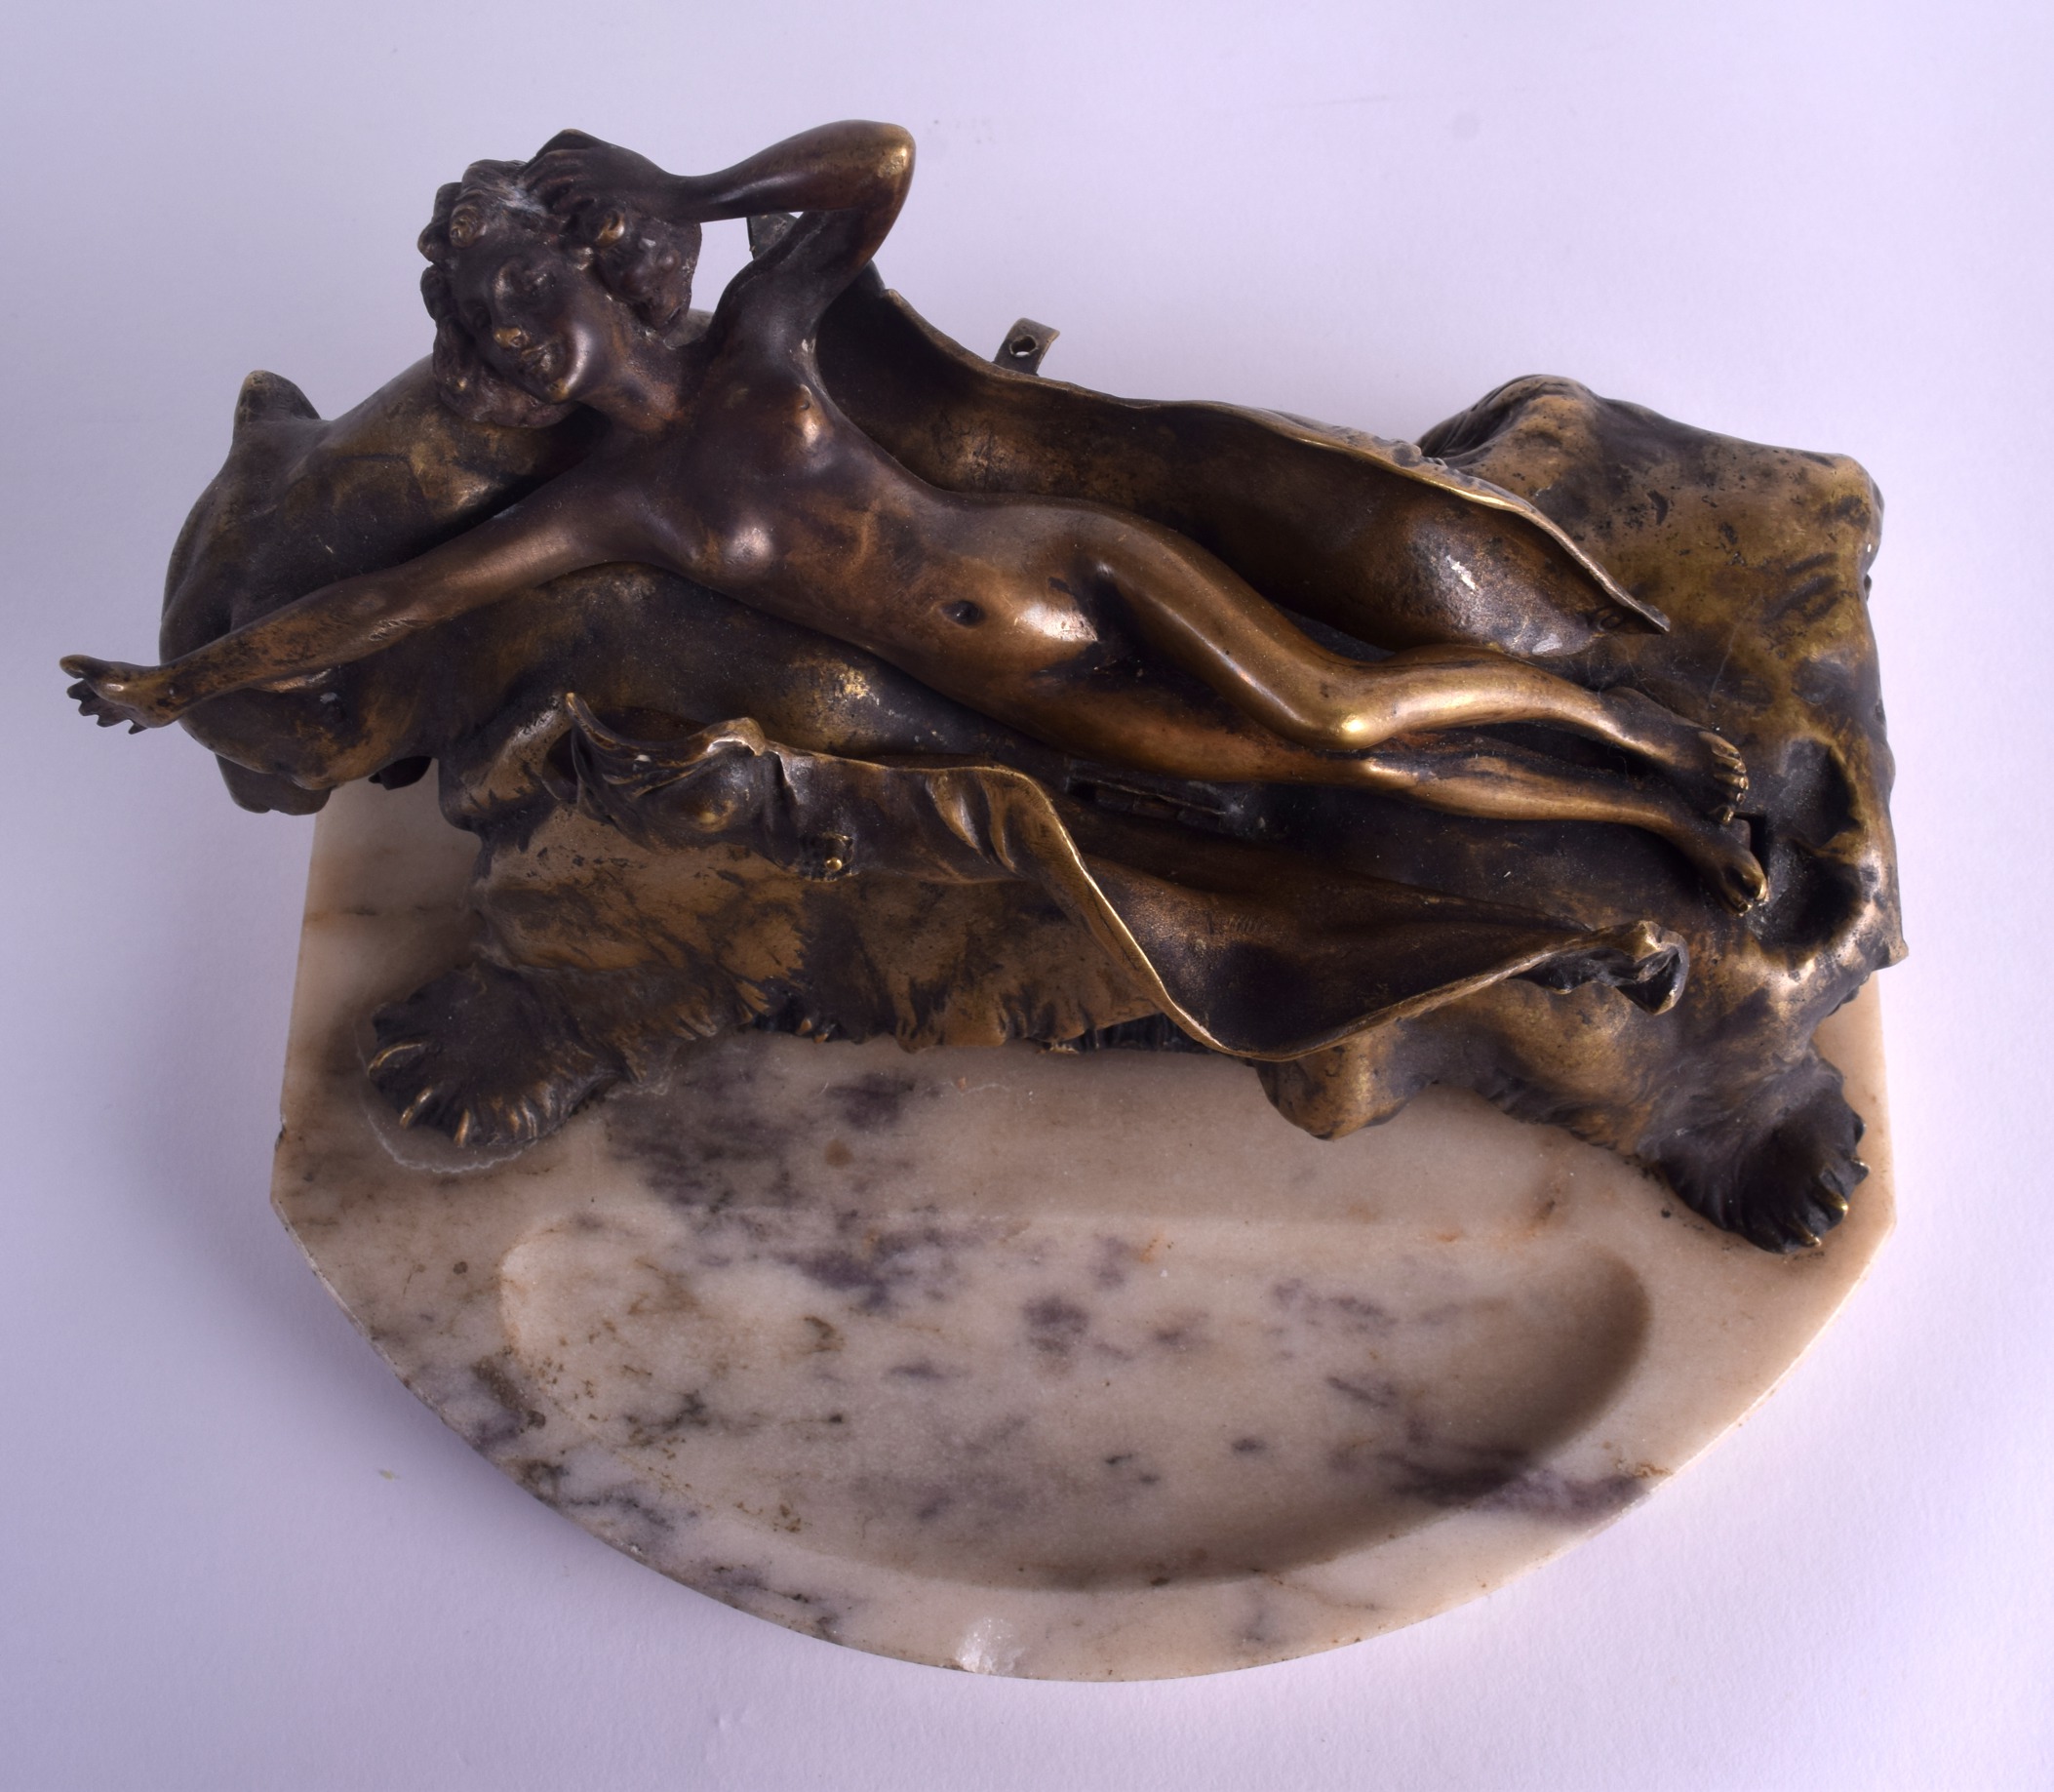 A RARE LARGE EARLY 20TH CENTURY AUSTRIAN EROTIC BRONZE GROUP by Carl Kauba (1865-1922), modelled - Image 3 of 3